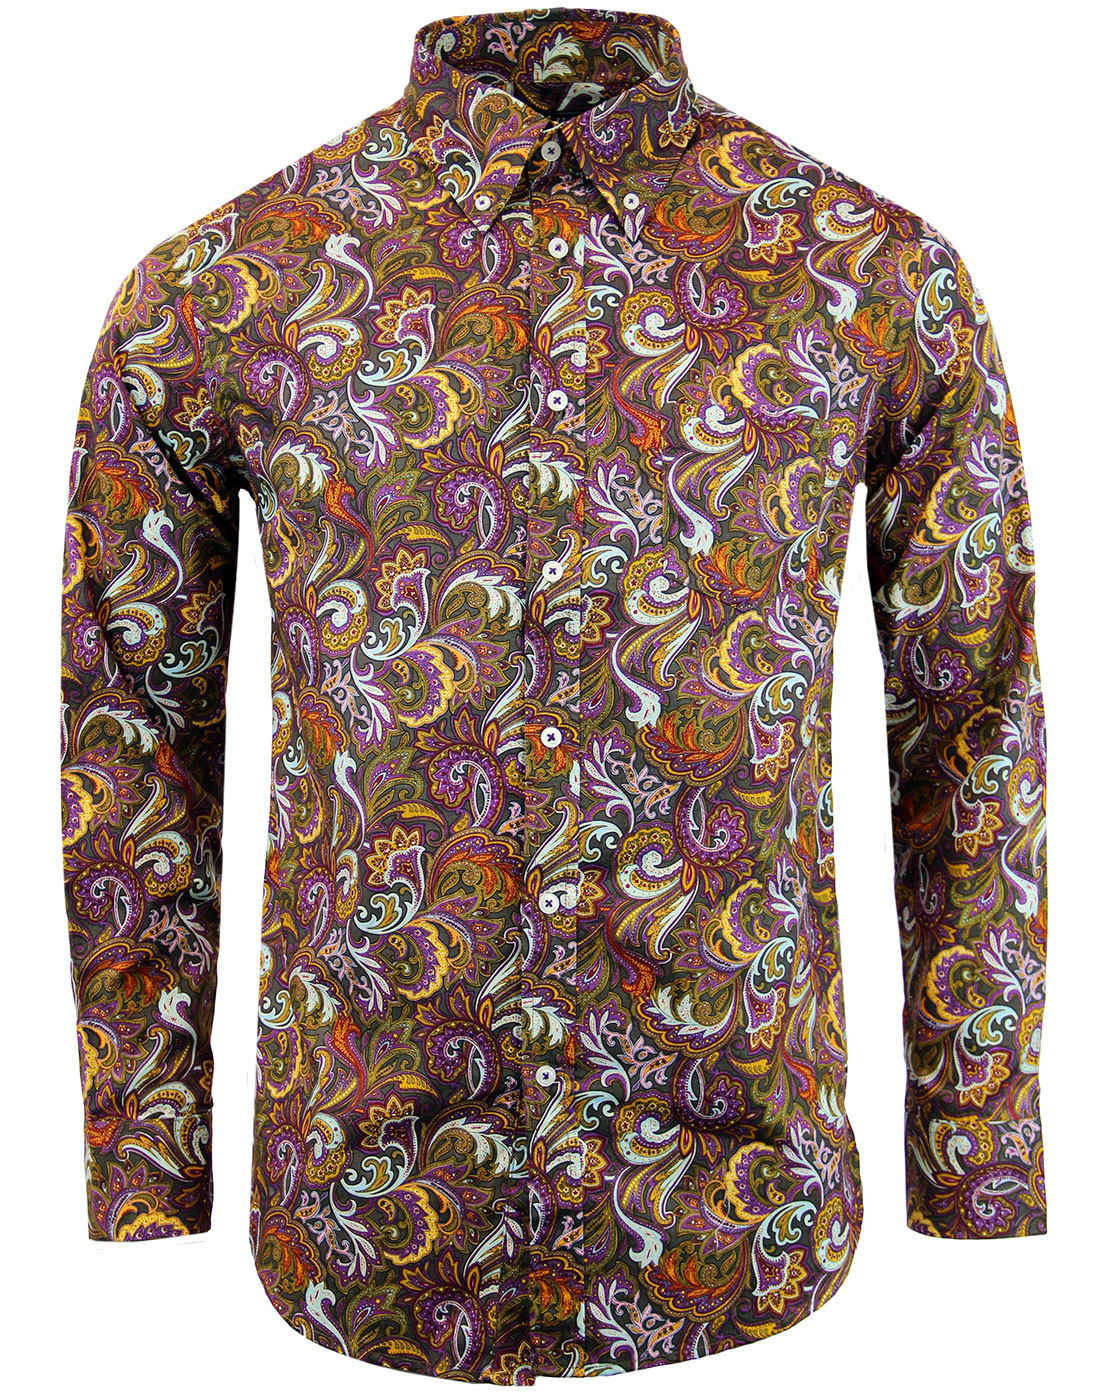 TROJAN RECORDS 60s Mod Psychedelic Floral Paisley Shirt Chocolate